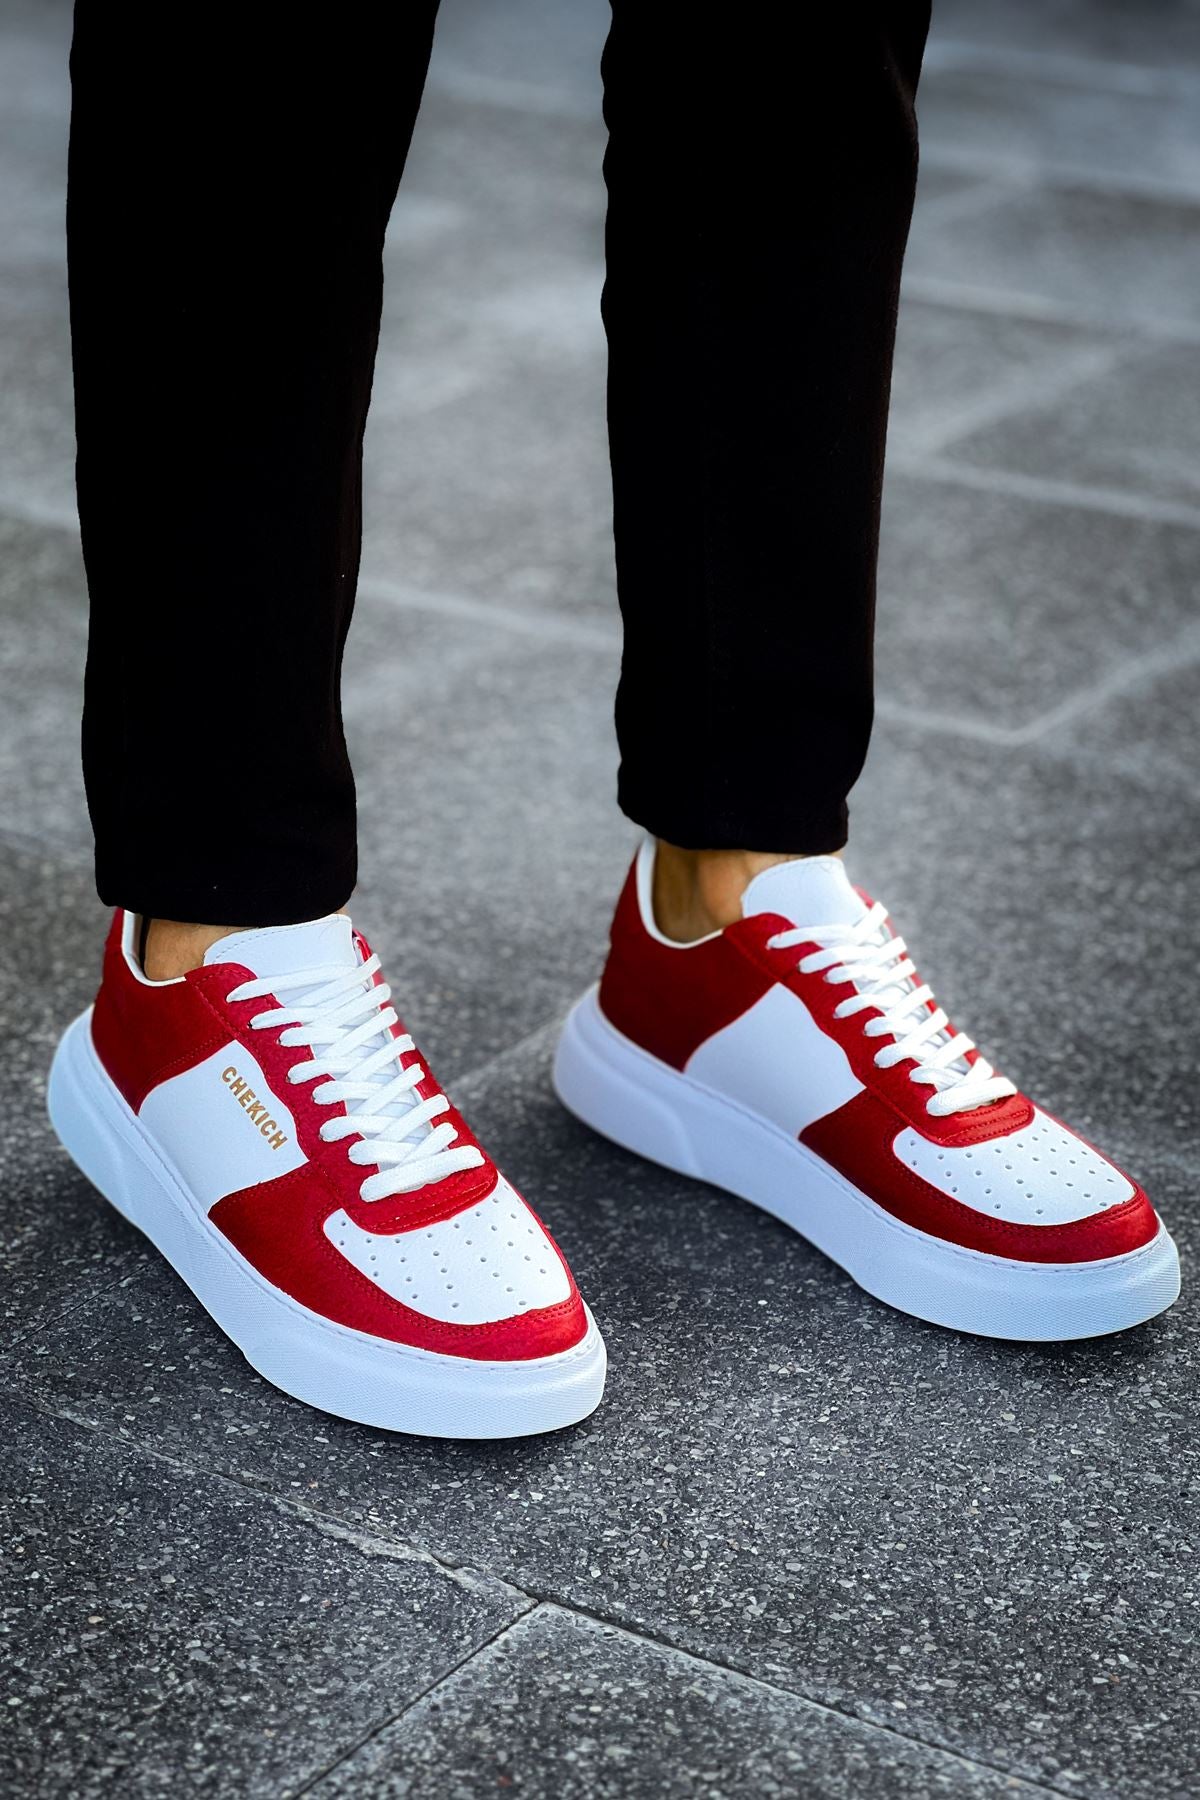 CH087 Men's Red-White Lace-up Casual Sneaker Sports Shoes - STREETMODE ™